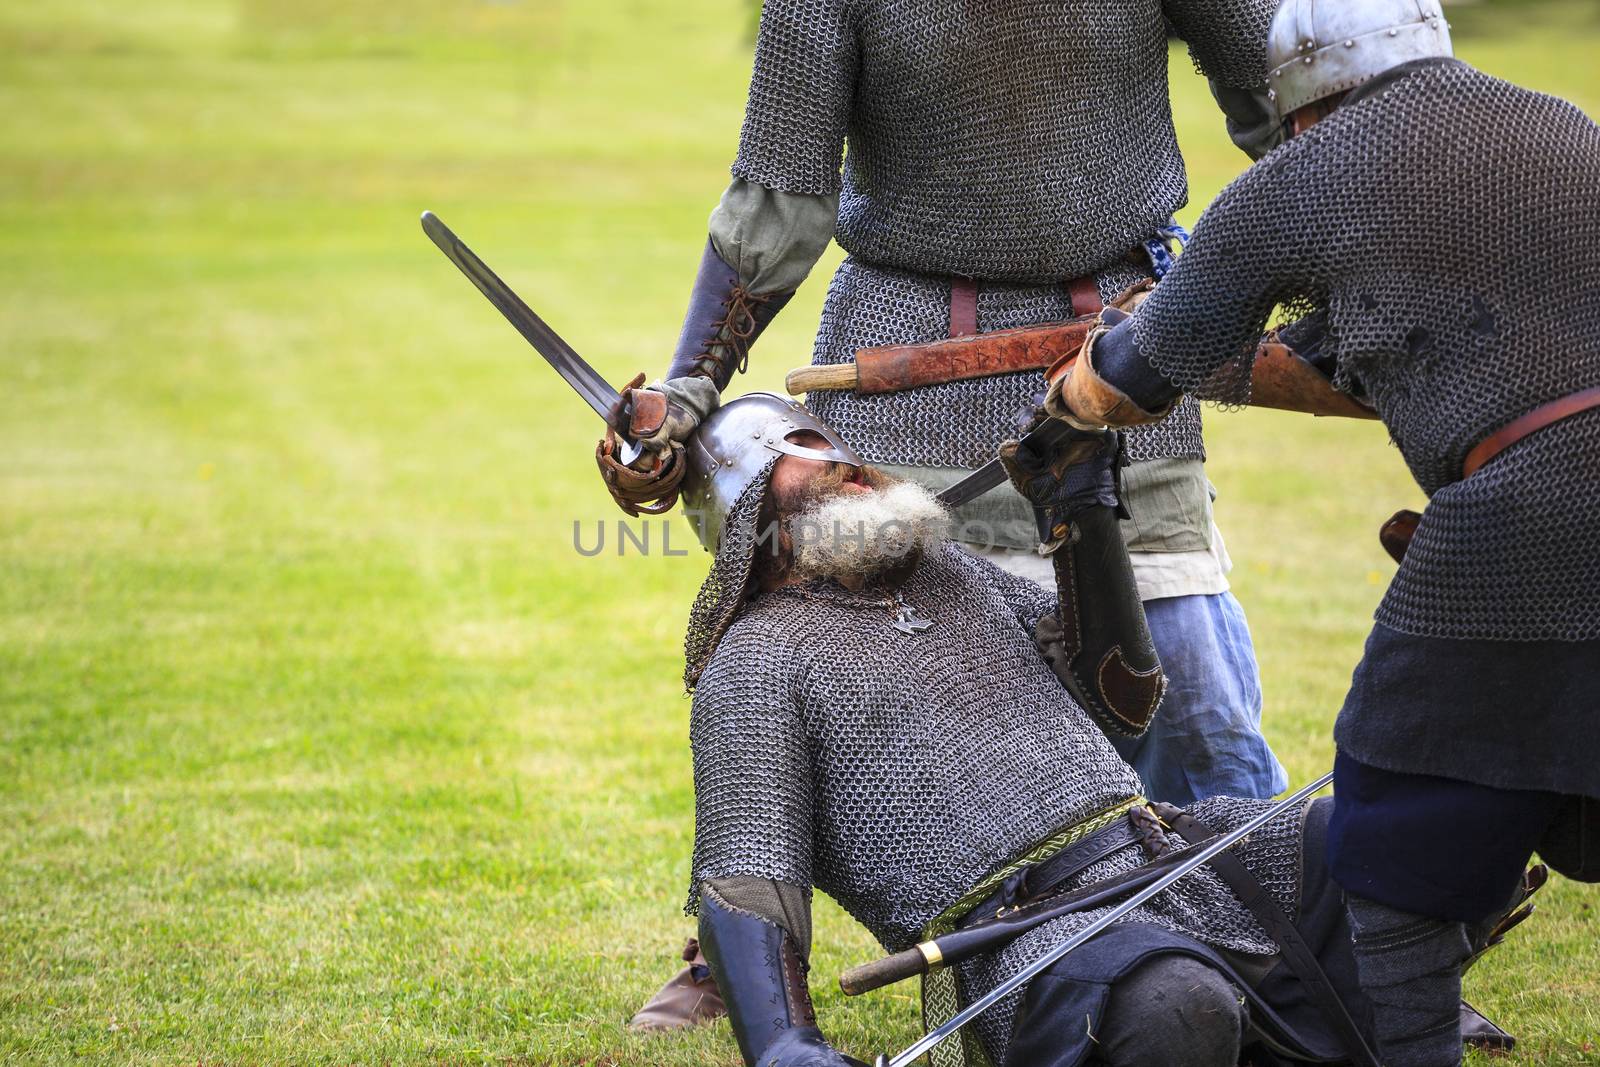 CALGARY CANADA JUN 13 2015: The Military Museum organized "Summer Skirmish" event where an unidentified soldier is seen in a historical Reenactment Battle. Viking solder in action.